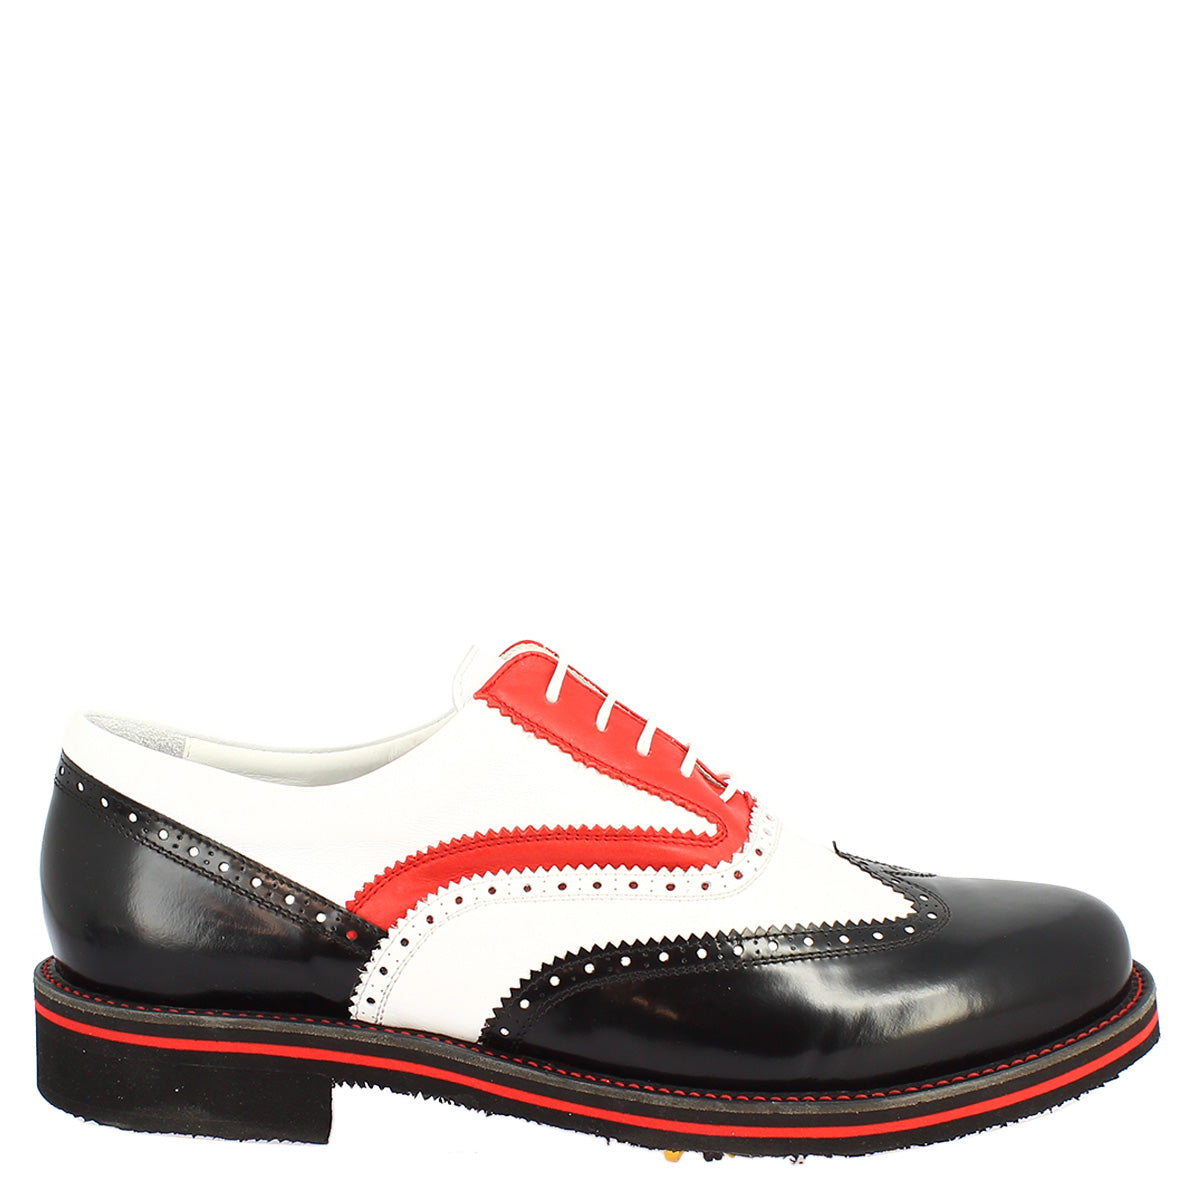 Handcrafted men's golf shoes in black white red full-grain leather